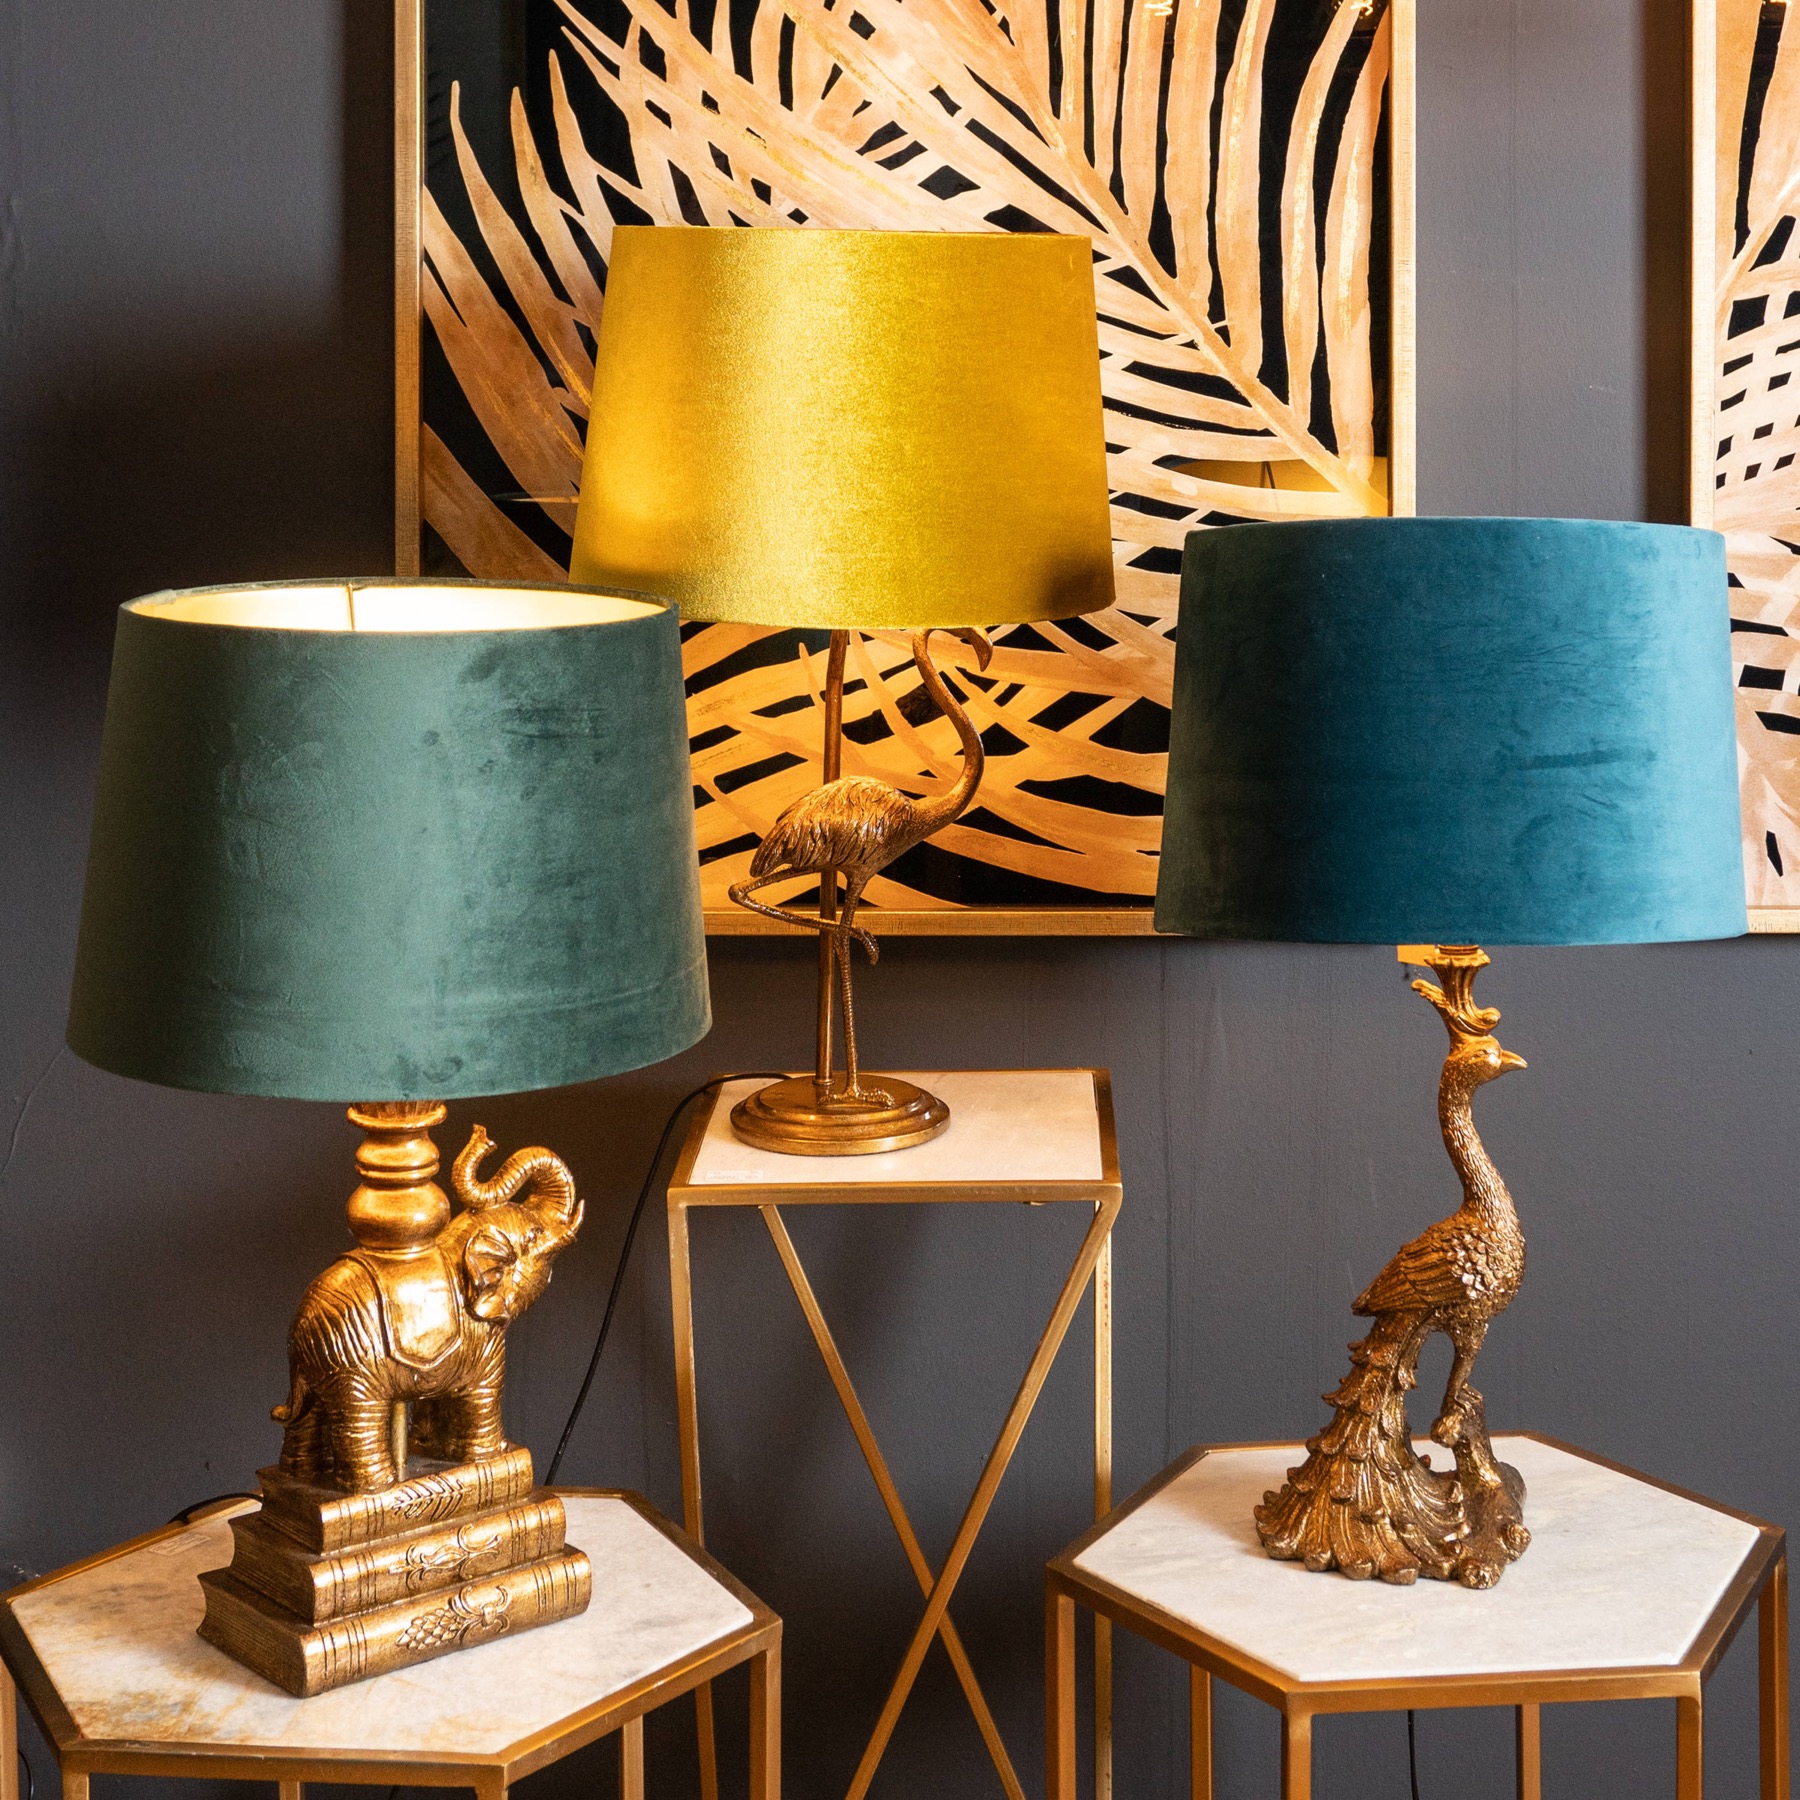 Antique Gold Peacock Lamp With Teal Velvet Shade - Image 3